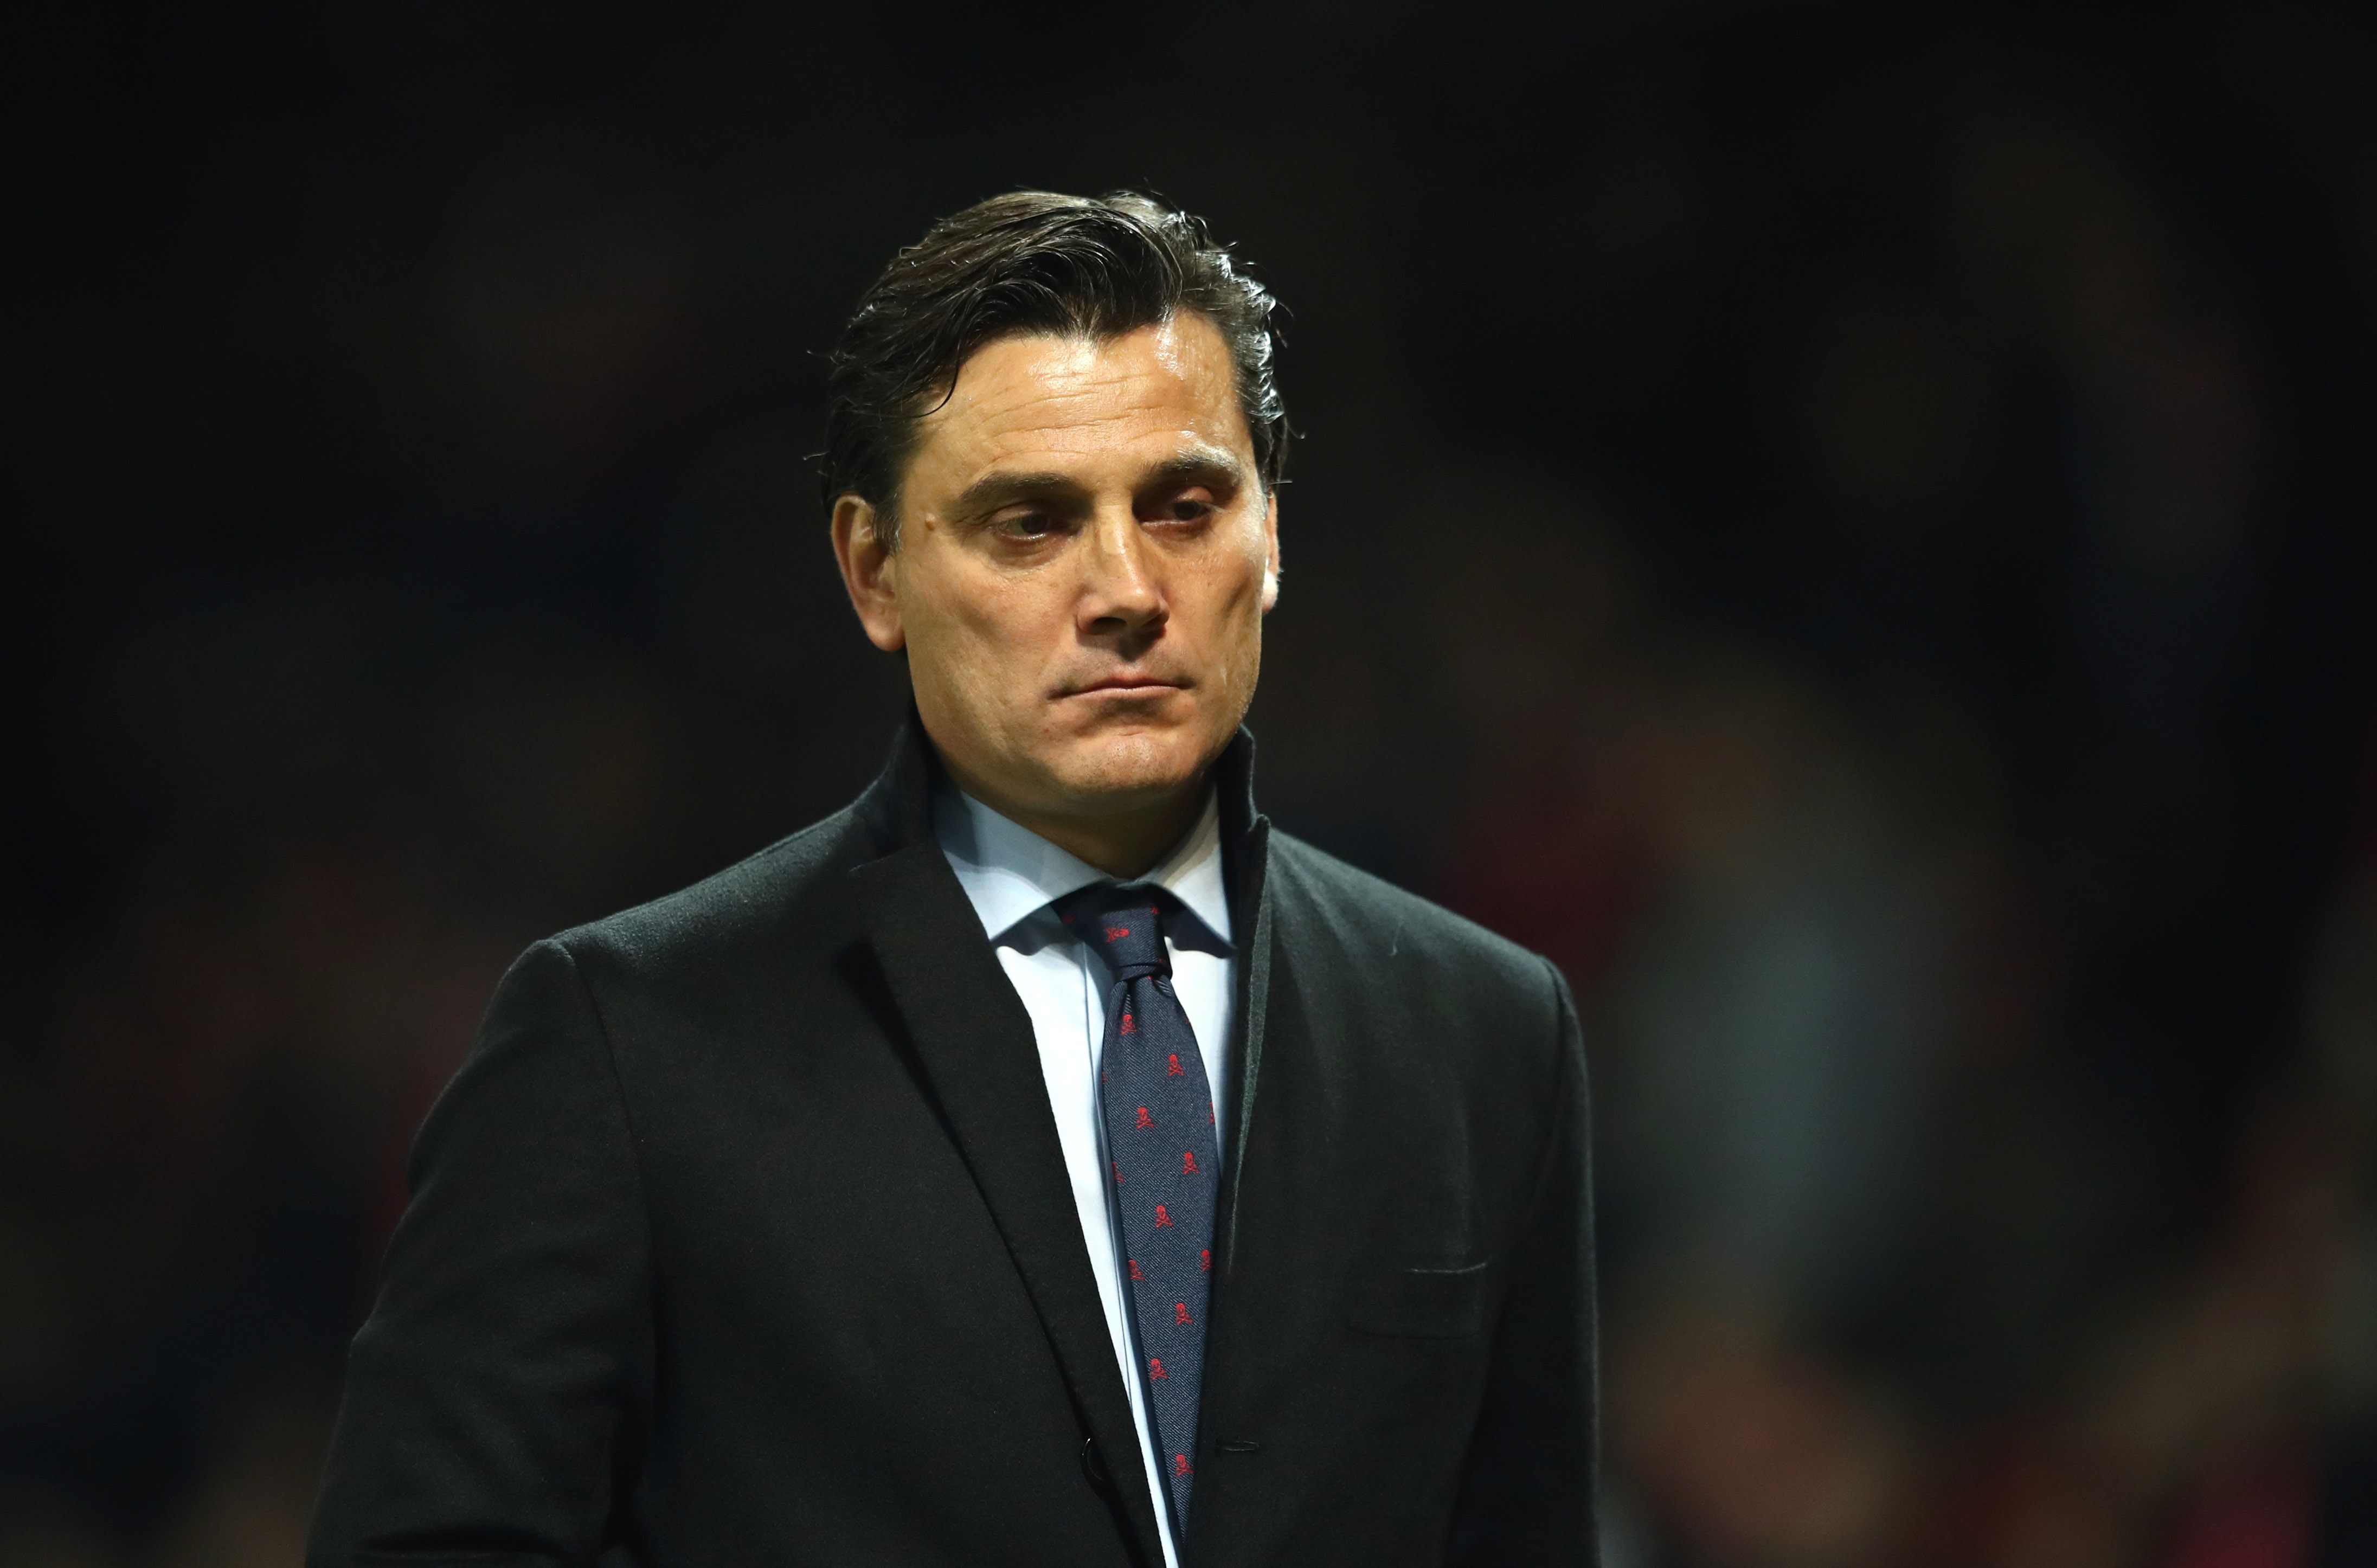 MANCHESTER, ENGLAND - MARCH 13:  Vincenzo Montella manager of Sevilla looks on prior to the UEFA Champions League Round of 16 Second Leg match between Manchester United and Sevilla FC at Old Trafford on March 13, 2018 in Manchester, United Kingdom.  (Photo by Clive Mason/Getty Images)